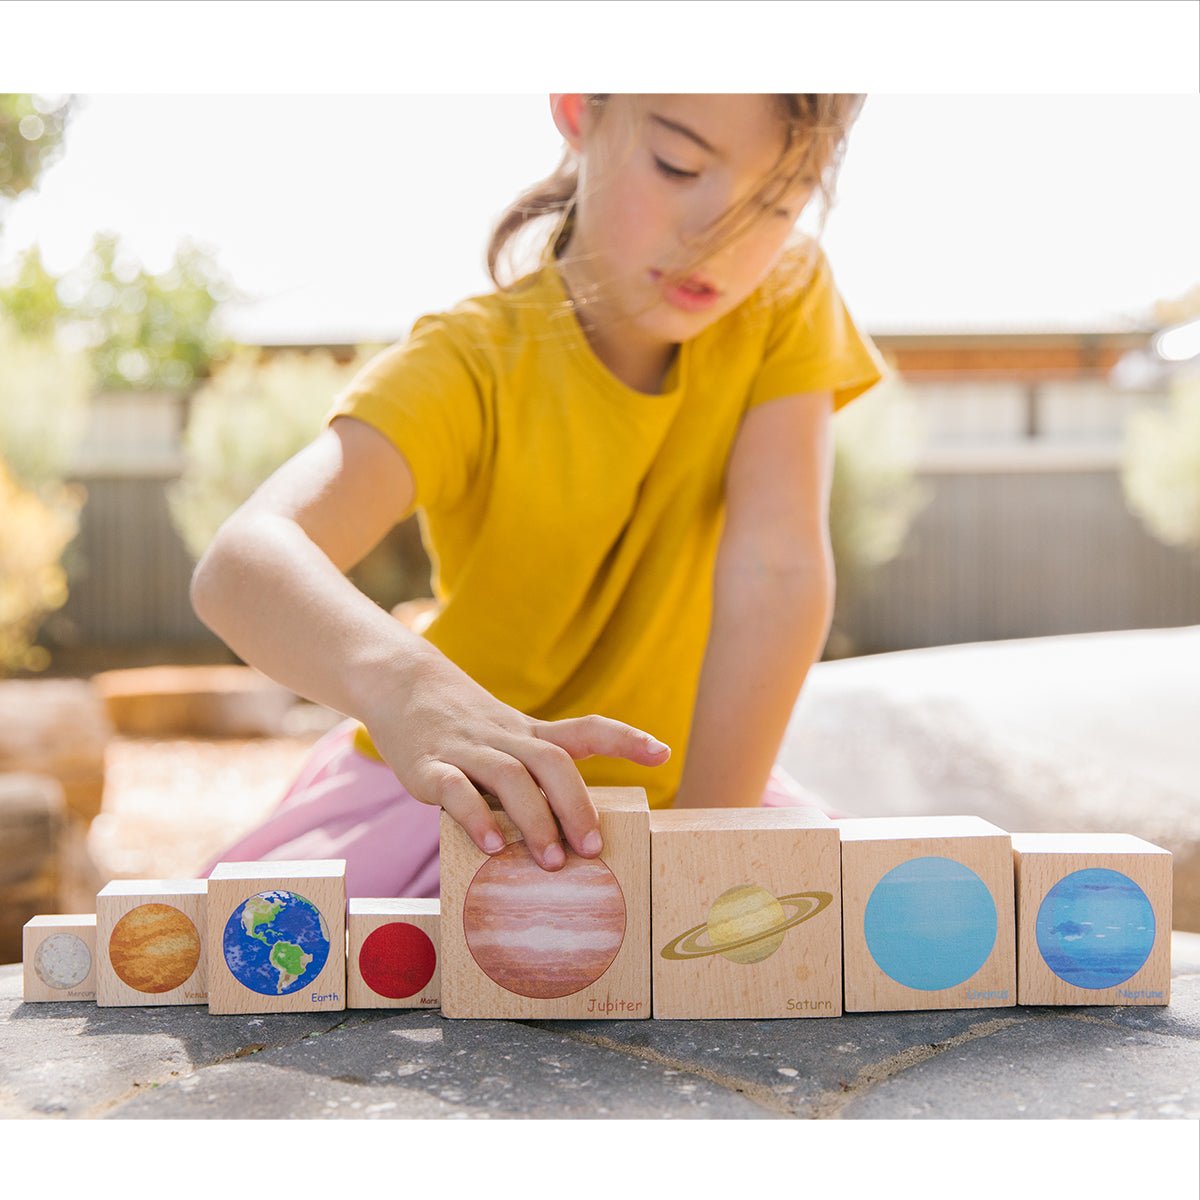 Playing with Planets Blocks | Freckled frog